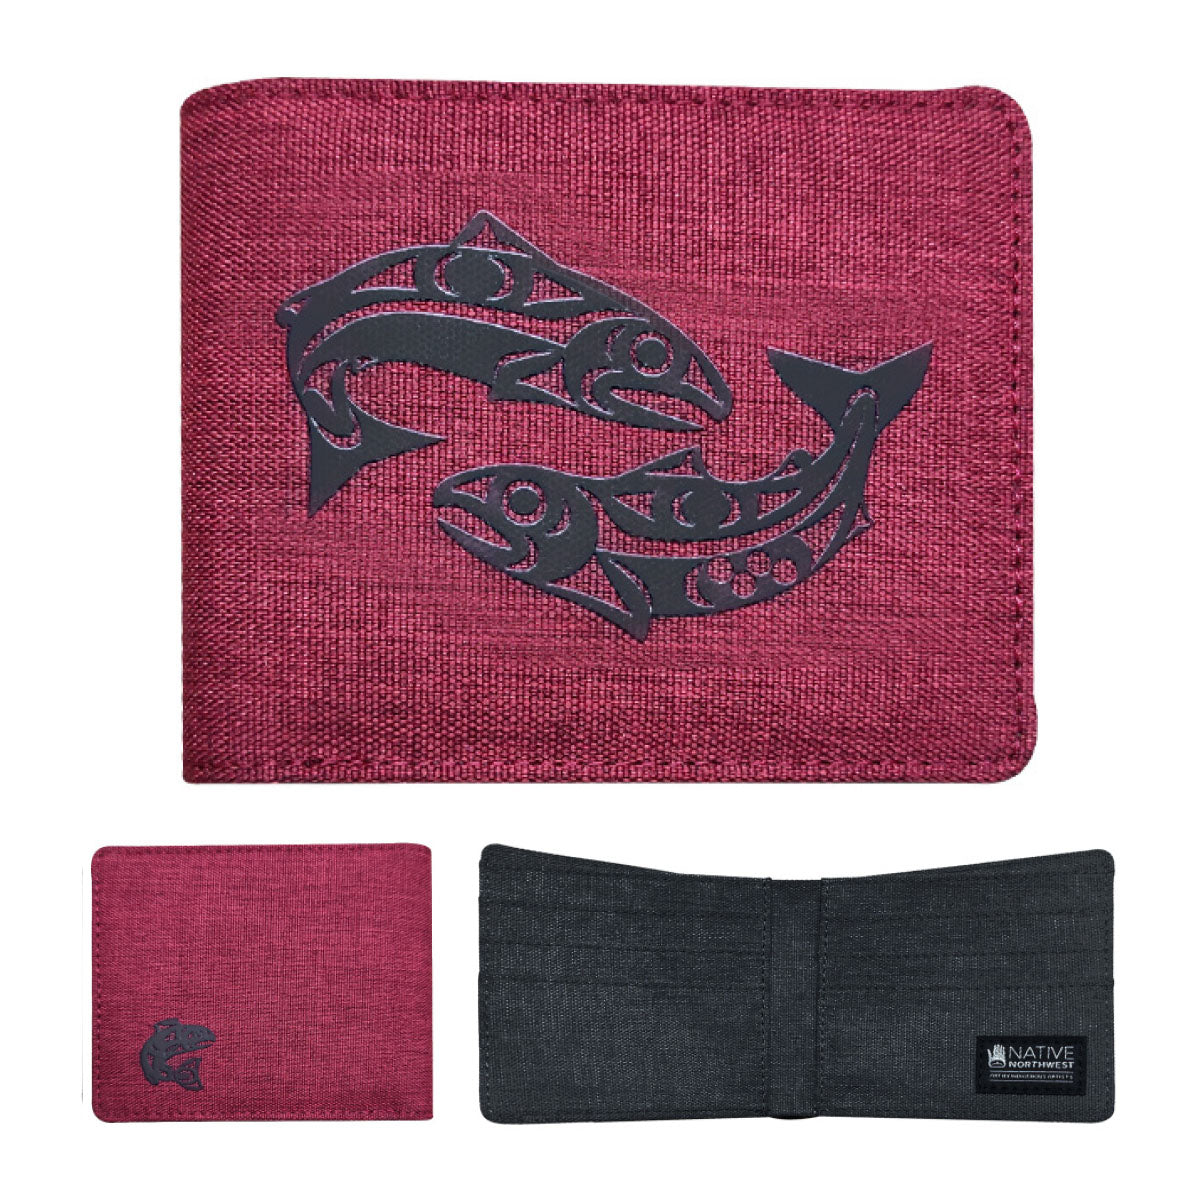 Wallet Salmon Red - Wallet Salmon Red -  - House of Himwitsa Native Art Gallery and Gifts